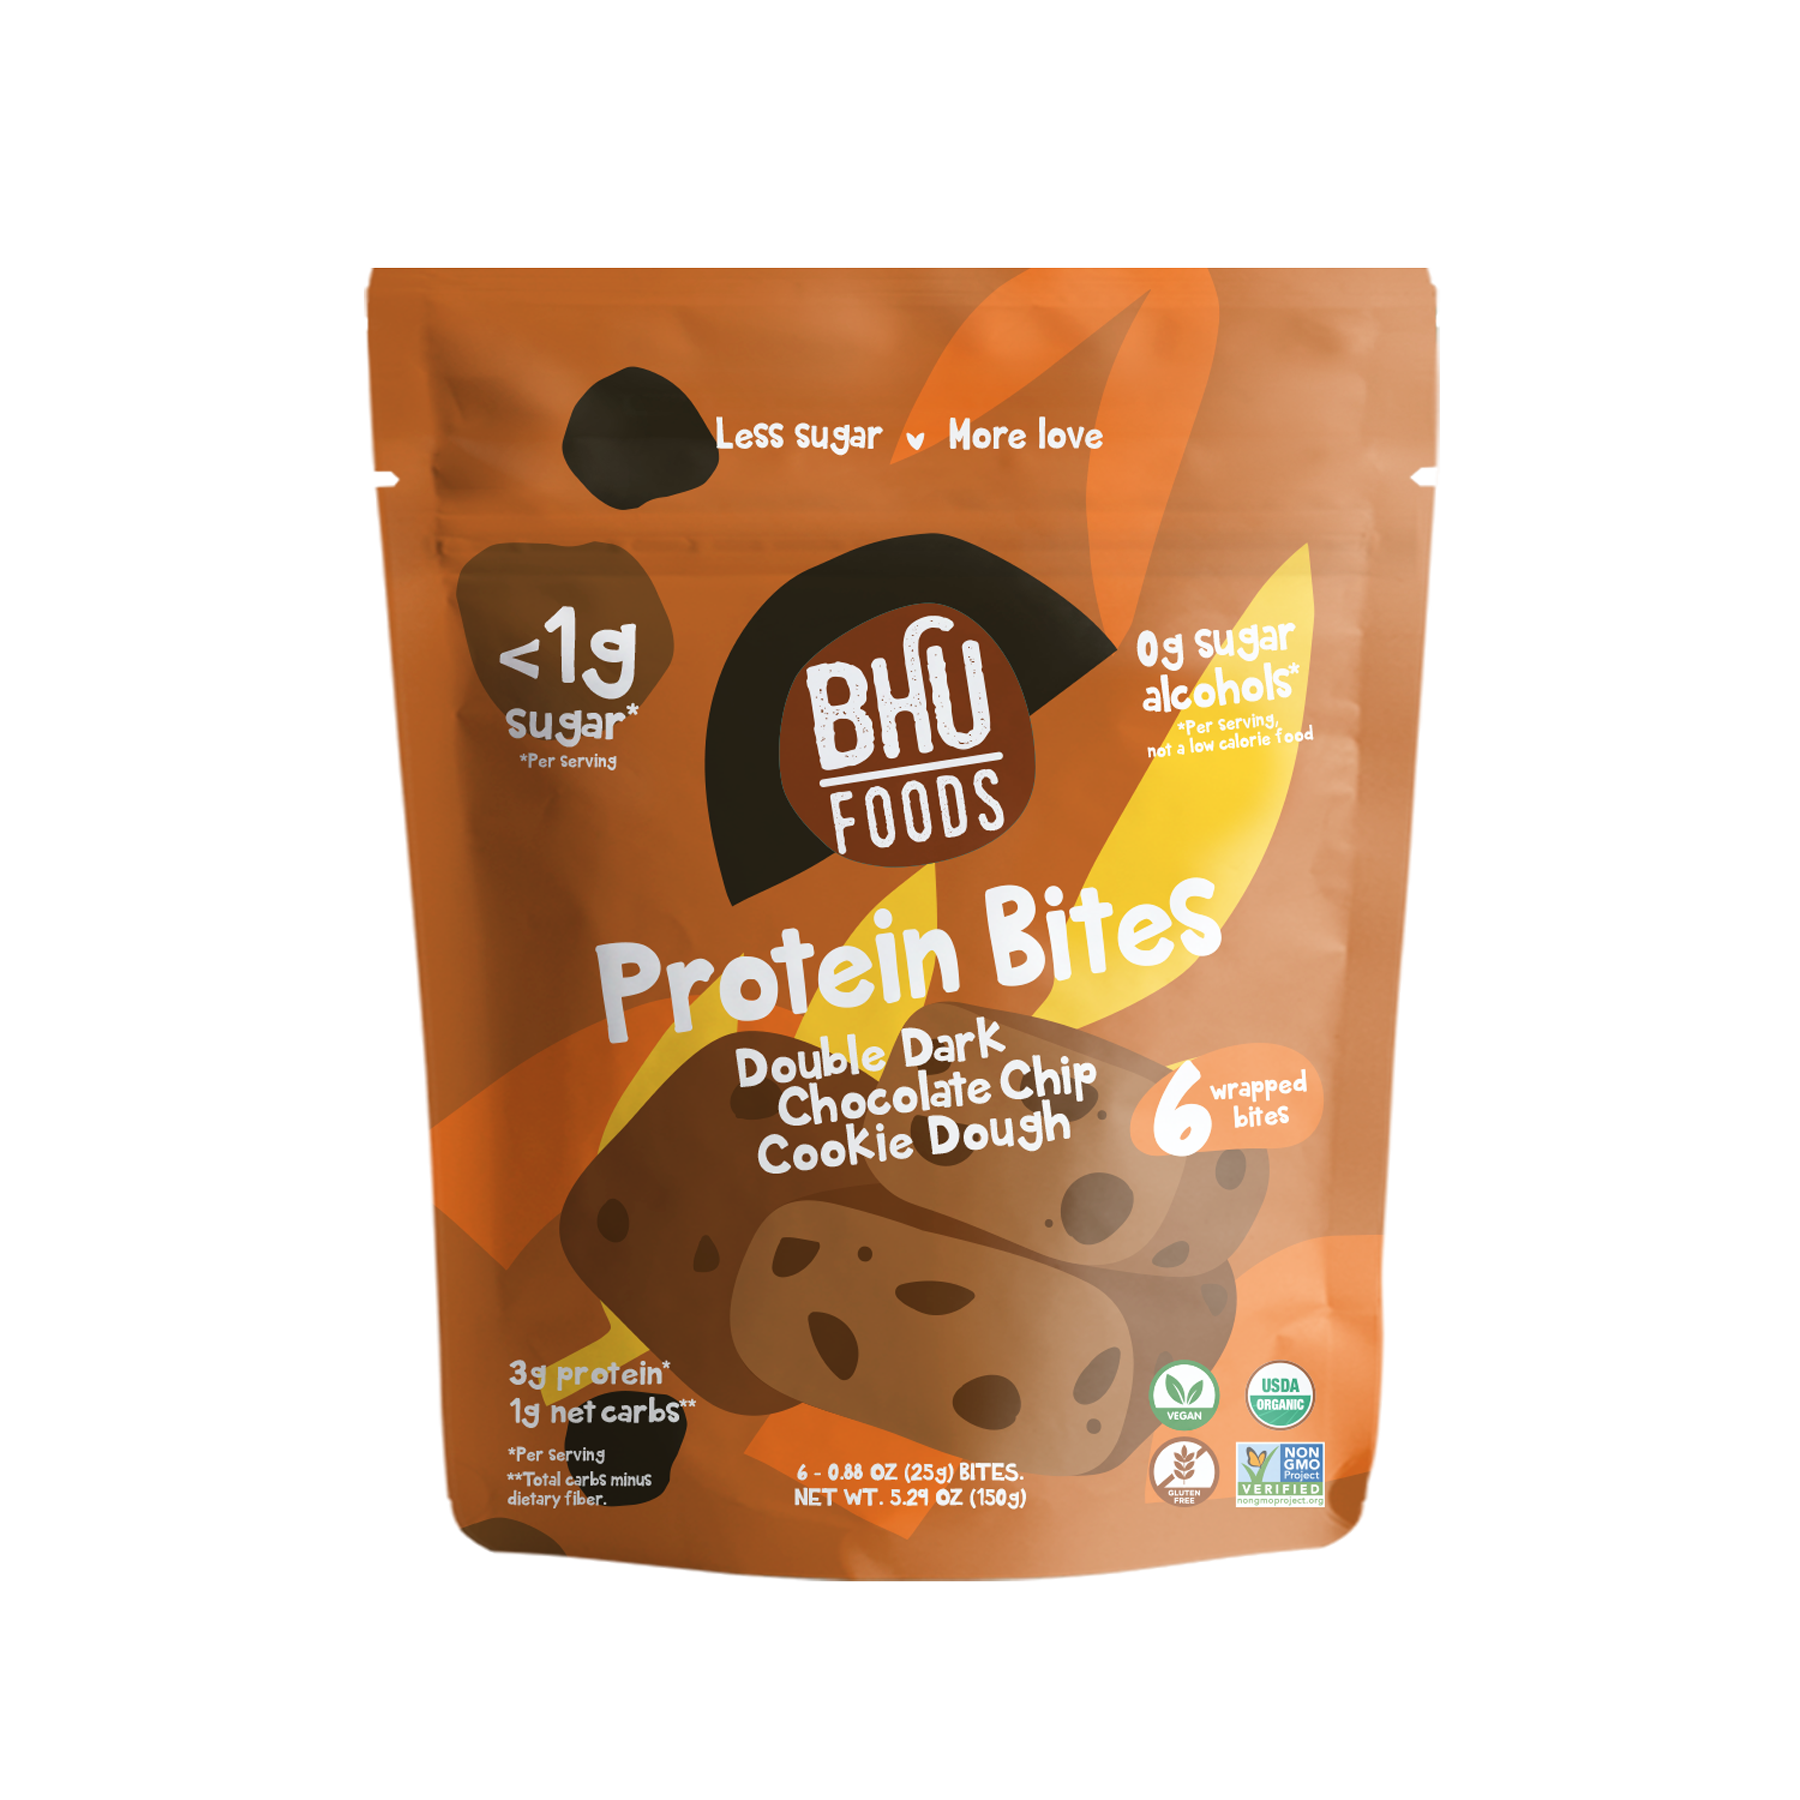 BHU Foods Protein Bites - Double Chocolate Cookie Dough 6 innerpacks per case 5.3 oz